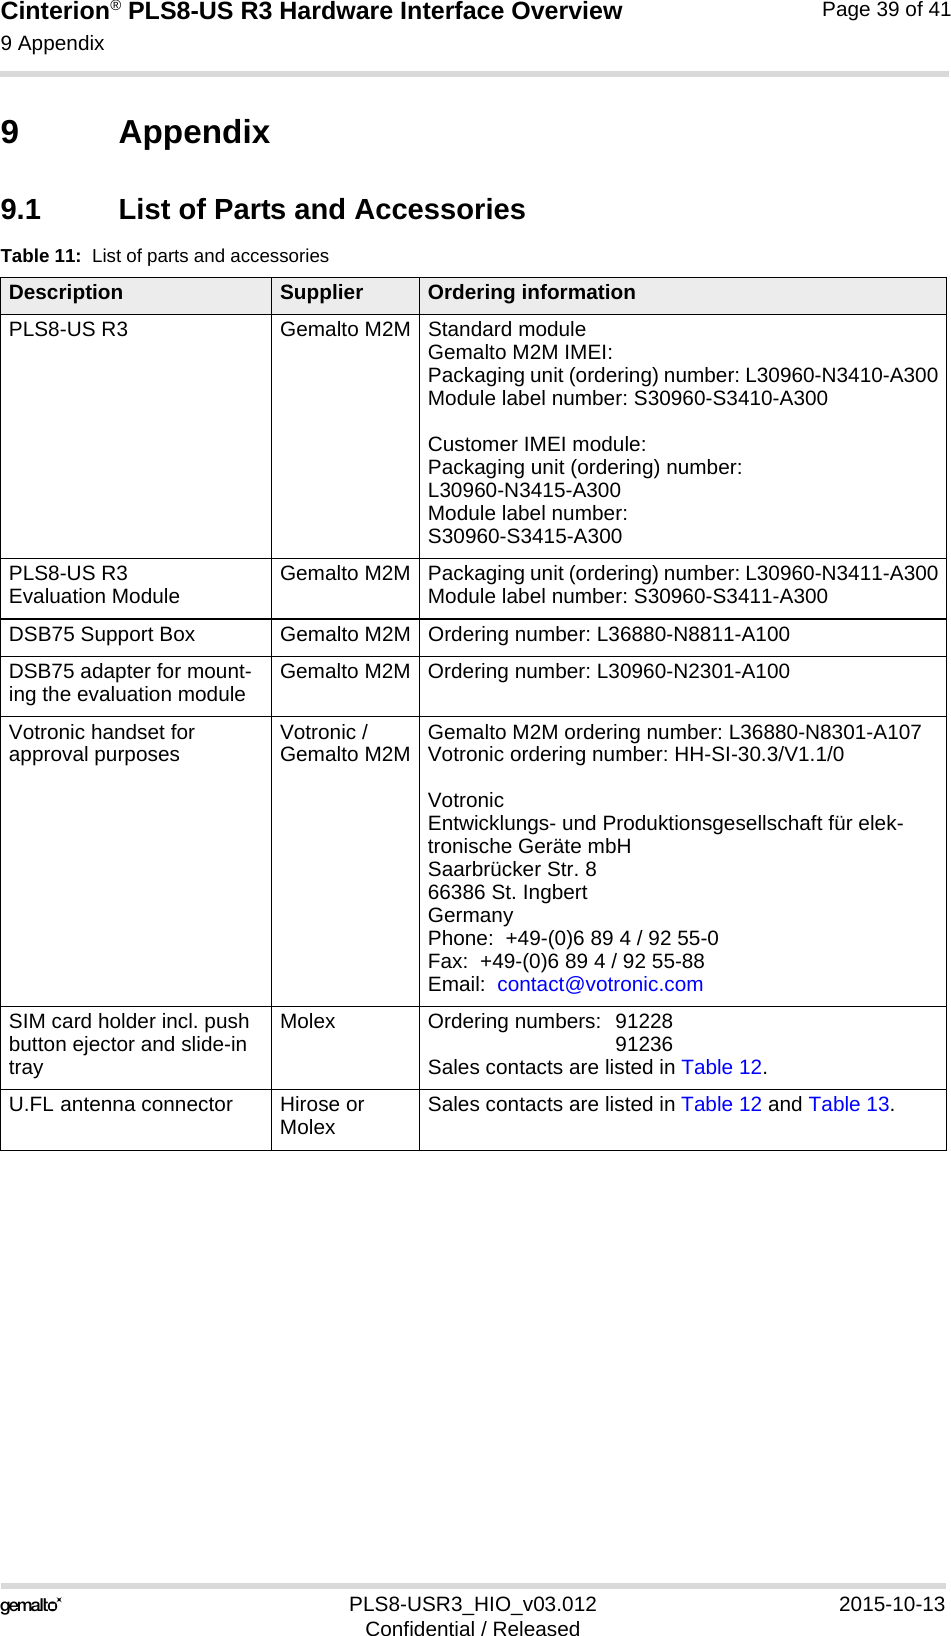 Cinterion® PLS8-US R3 Hardware Interface Overview9 Appendix40PLS8-USR3_HIO_v03.012 2015-10-13Confidential / ReleasedPage 39 of 419 Appendix9.1 List of Parts and AccessoriesTable 11:  List of parts and accessoriesDescription Supplier Ordering informationPLS8-US R3  Gemalto M2M Standard moduleGemalto M2M IMEI:Packaging unit (ordering) number: L30960-N3410-A300Module label number: S30960-S3410-A300Customer IMEI module:Packaging unit (ordering) number:L30960-N3415-A300Module label number:S30960-S3415-A300PLS8-US R3 Evaluation Module Gemalto M2M Packaging unit (ordering) number: L30960-N3411-A300Module label number: S30960-S3411-A300DSB75 Support Box Gemalto M2M Ordering number: L36880-N8811-A100DSB75 adapter for mount-ing the evaluation module Gemalto M2M Ordering number: L30960-N2301-A100Votronic handset for approval purposes Votronic / Gemalto M2M Gemalto M2M ordering number: L36880-N8301-A107Votronic ordering number: HH-SI-30.3/V1.1/0Votronic Entwicklungs- und Produktionsgesellschaft für elek-tronische Geräte mbHSaarbrücker Str. 866386 St. IngbertGermanyPhone:  +49-(0)6 89 4 / 92 55-0Fax:  +49-(0)6 89 4 / 92 55-88Email:  contact@votronic.comSIM card holder incl. push button ejector and slide-in trayMolex Ordering numbers:  91228 91236Sales contacts are listed in Table 12.U.FL antenna connector Hirose or Molex Sales contacts are listed in Table 12 and Table 13.